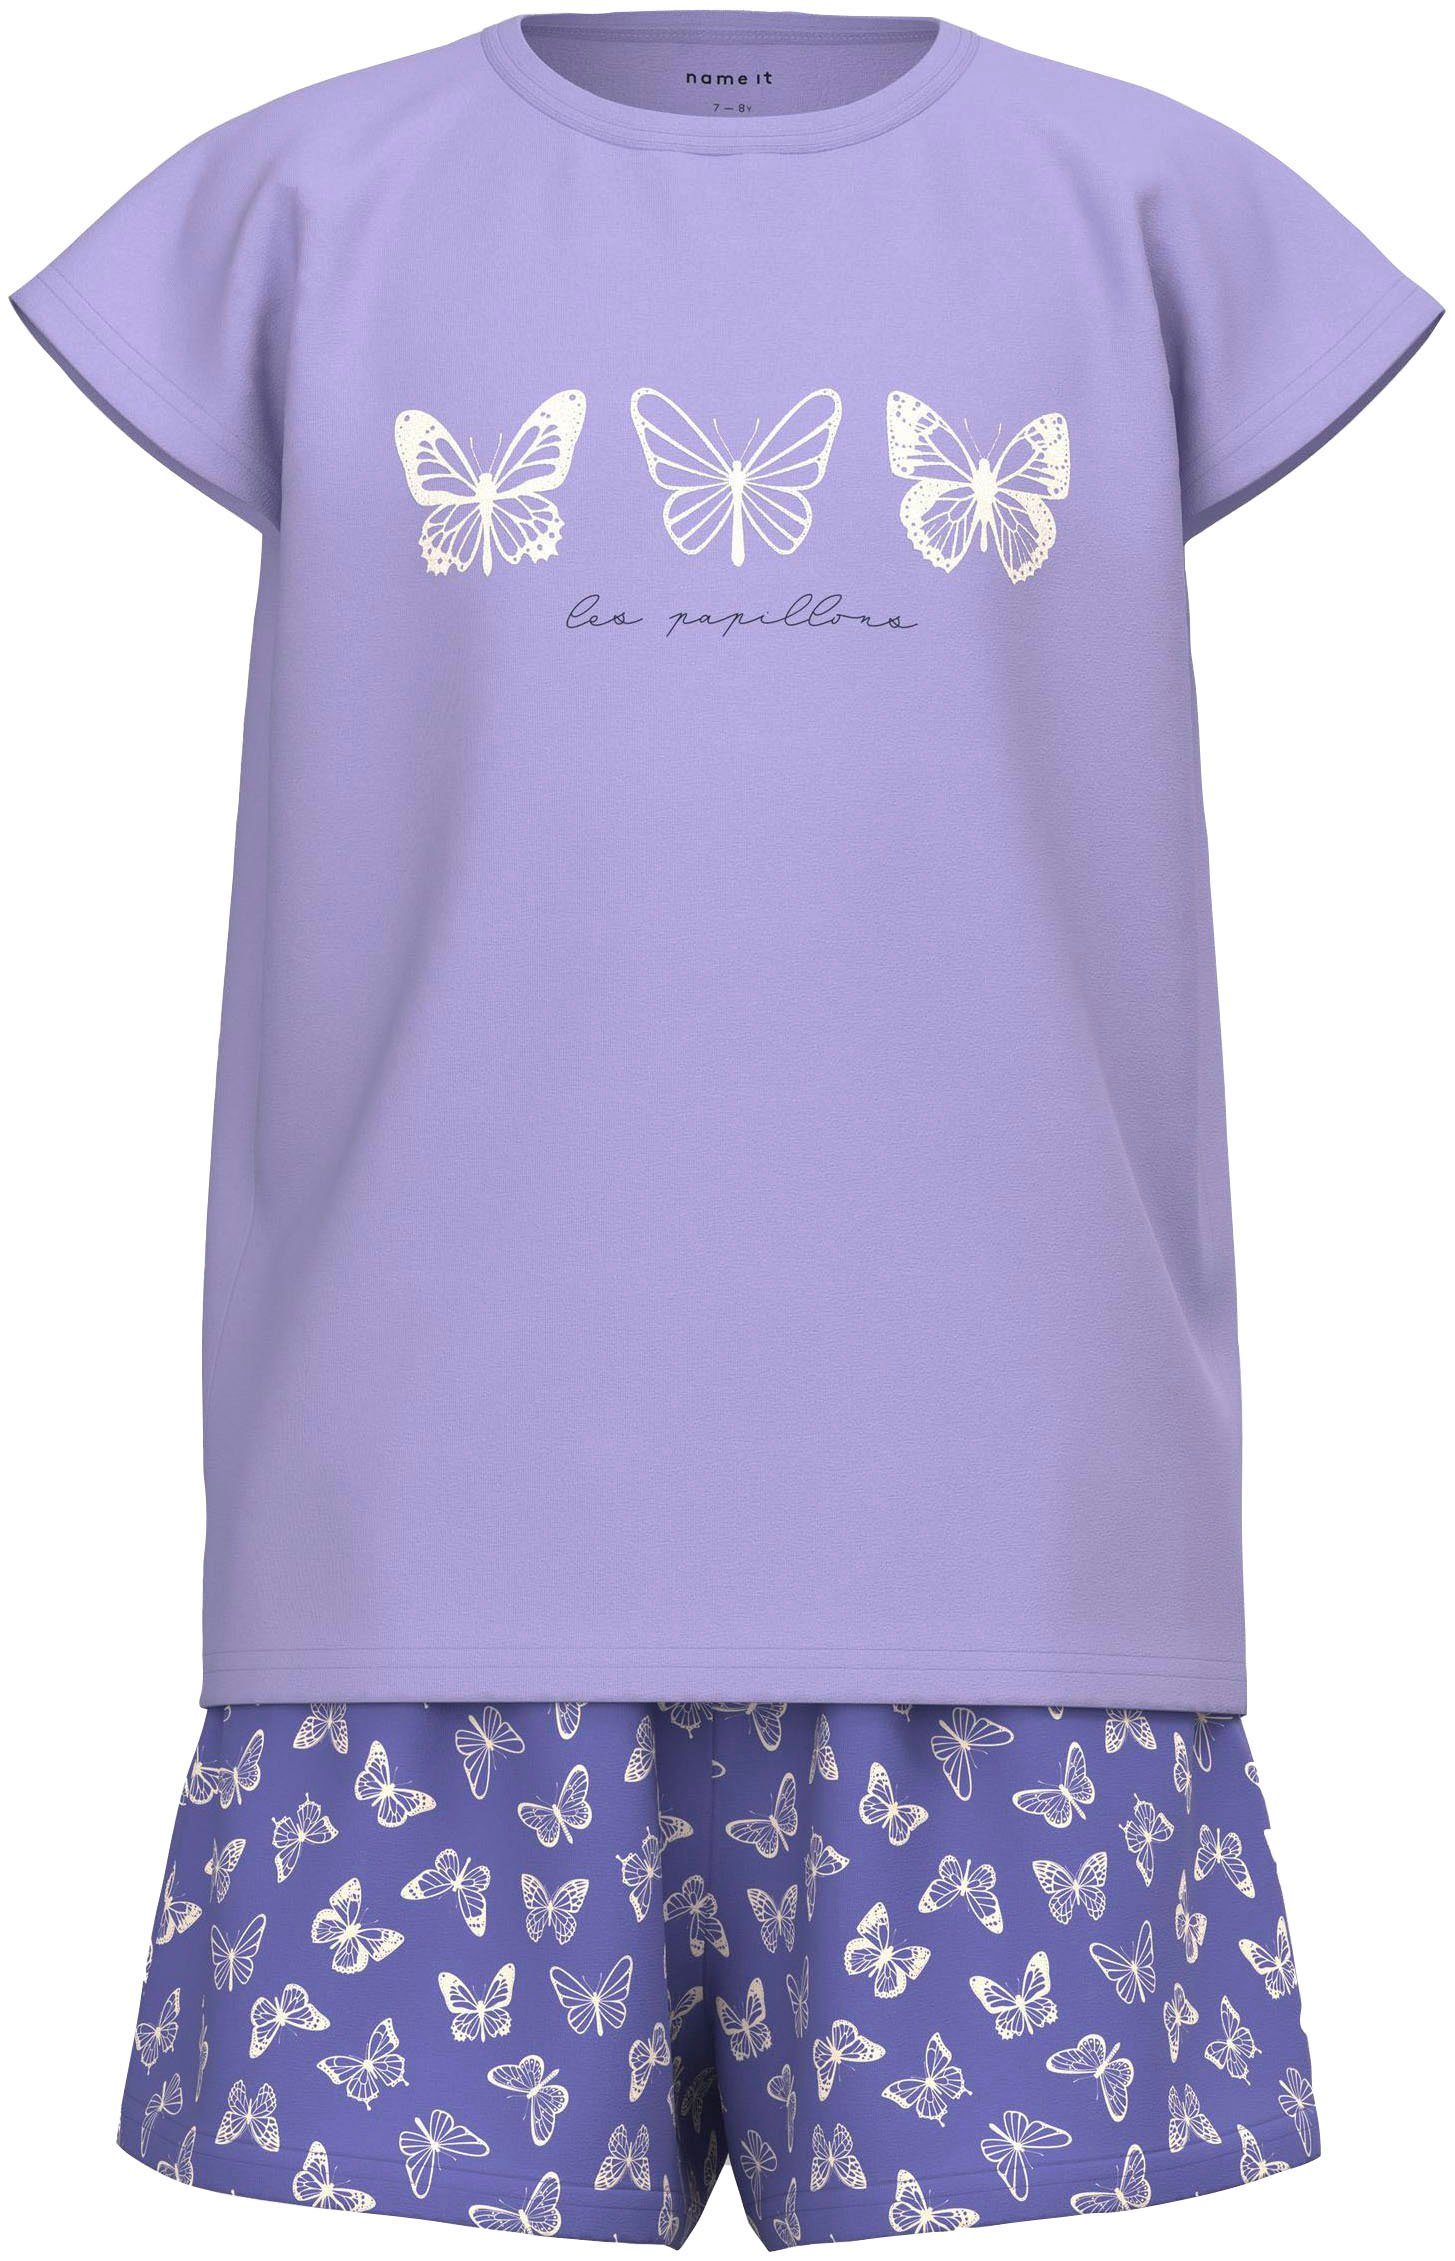 Shorty Druck BUTTERFLY NKFNIGHTSET NOOS (Packung, It tlg) Name CAP 2 mit Schmetterling